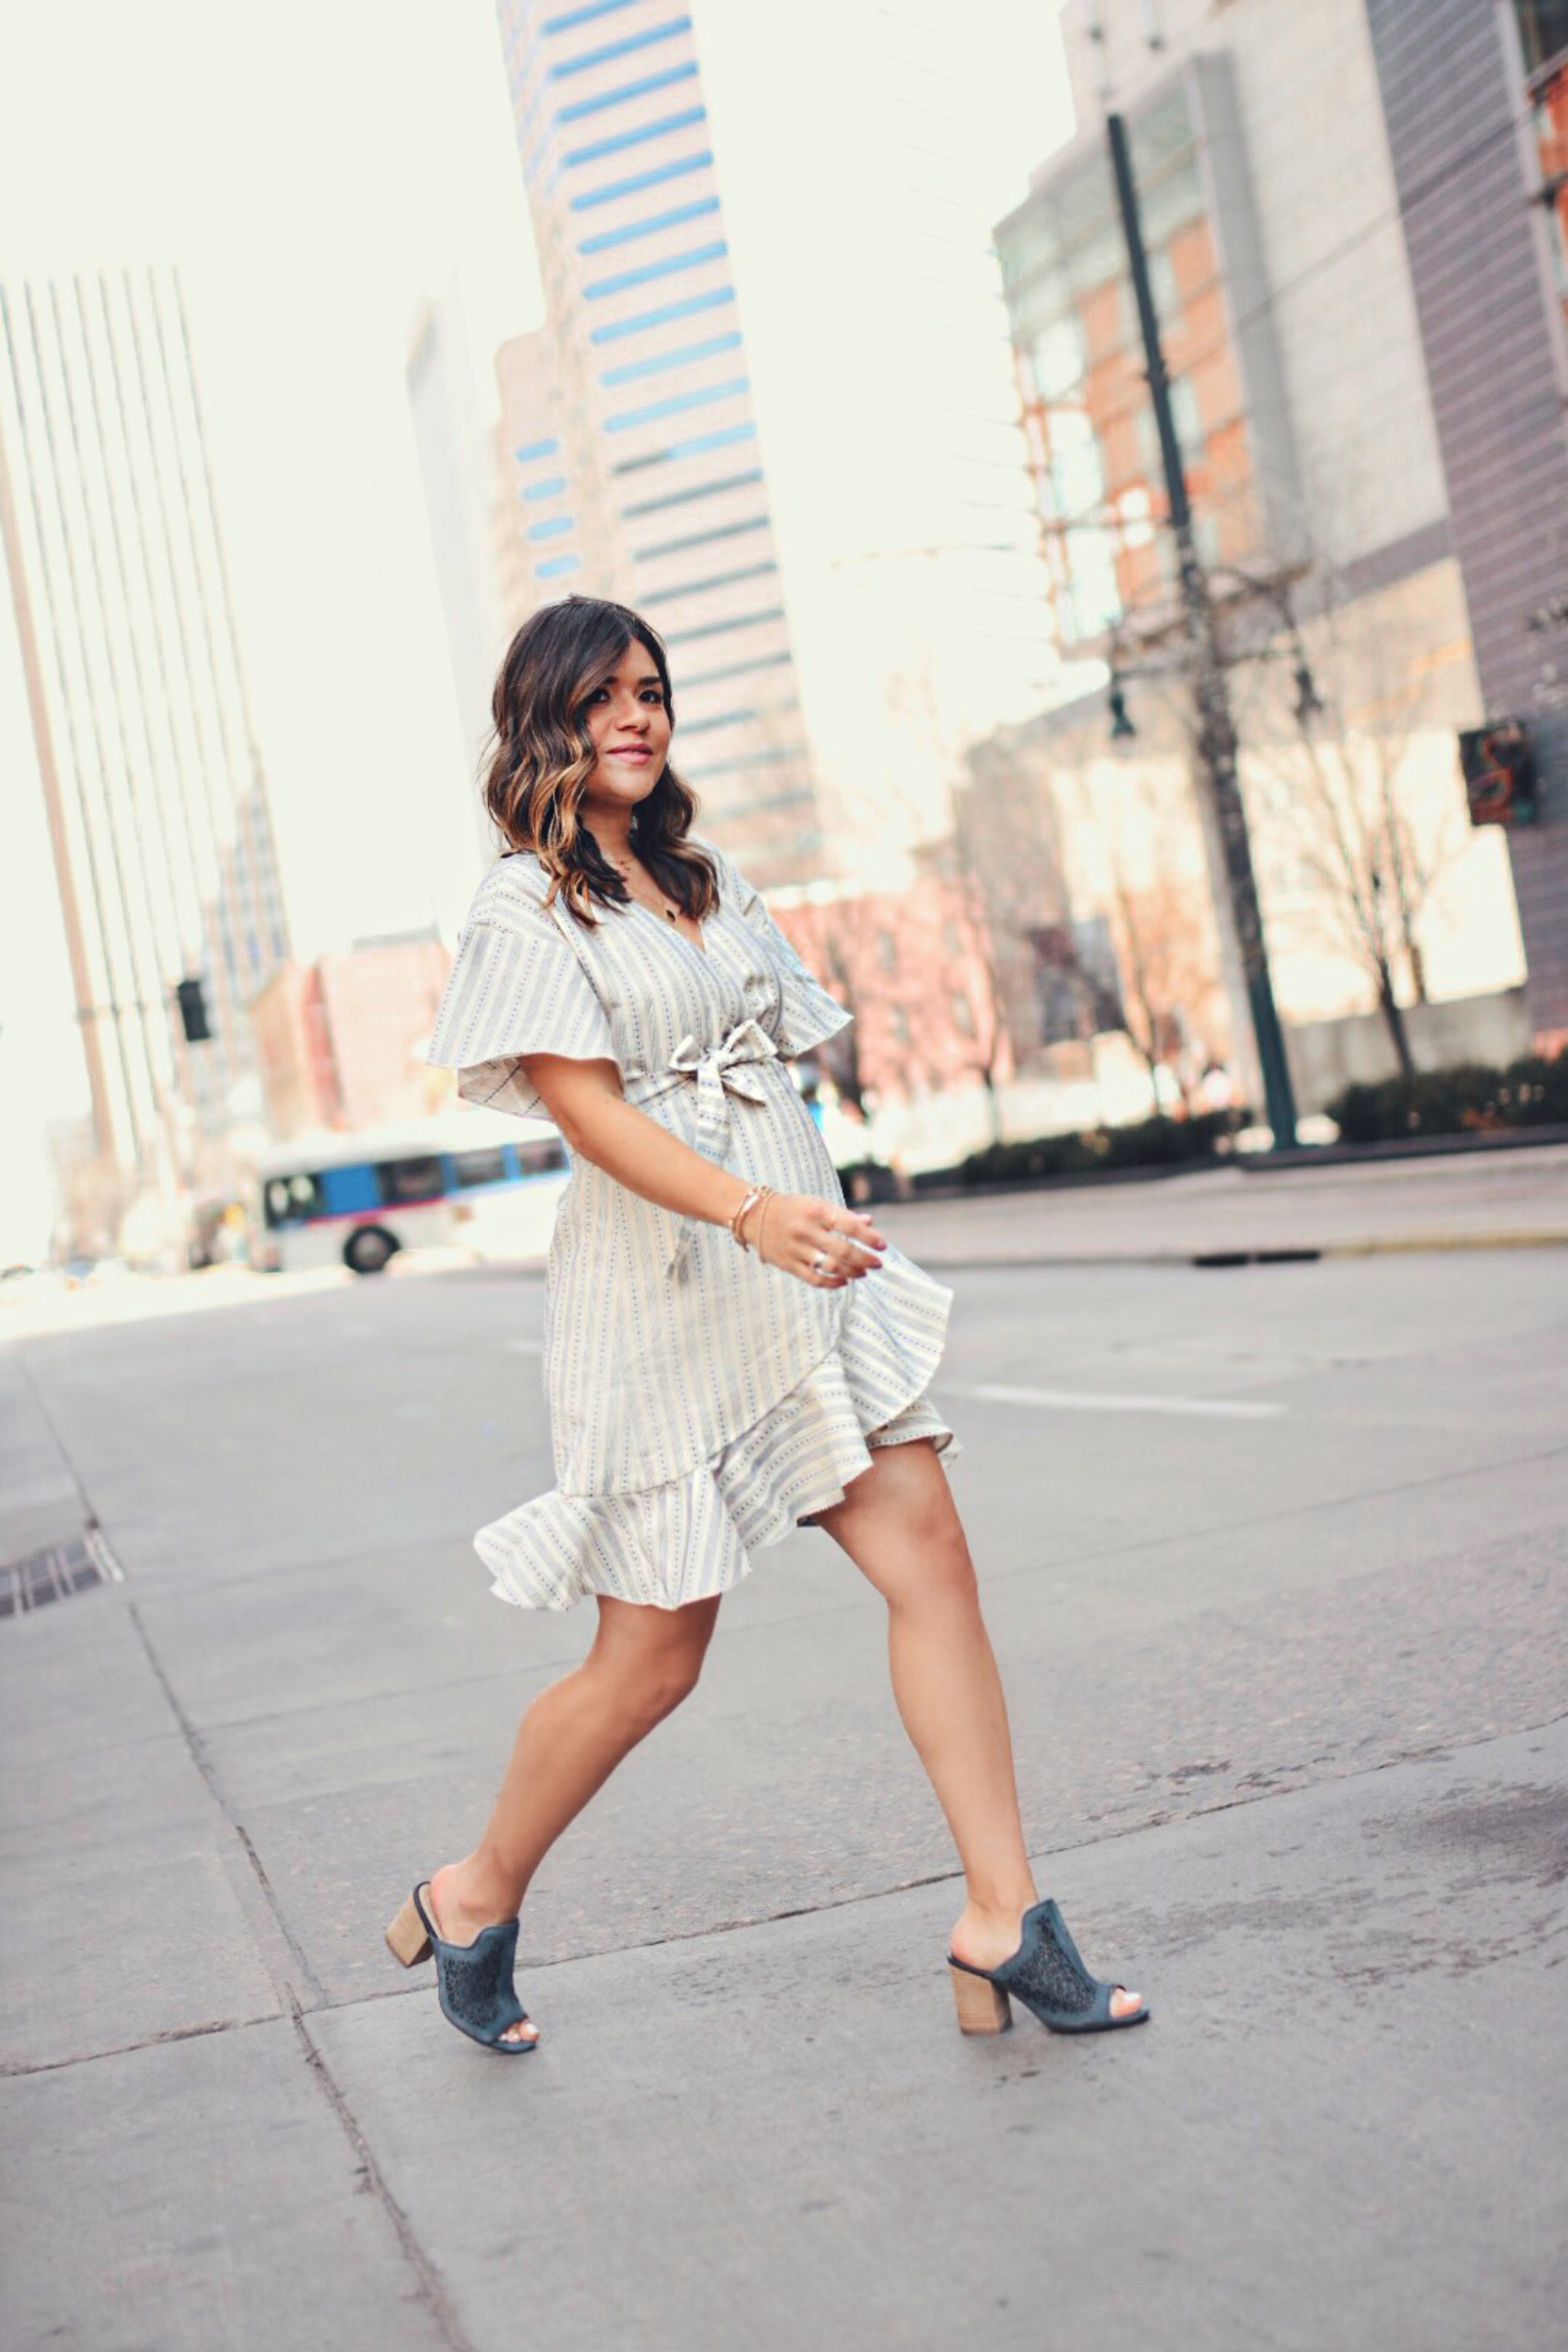 Carolina Hellal of Chic Talk wearing the Hush Puppies Malia Perf Slide via Zappos - MUST-HAVE HUSH PUPPIES SLIDES styled by popular Denver fashion blogger, Chic Talk